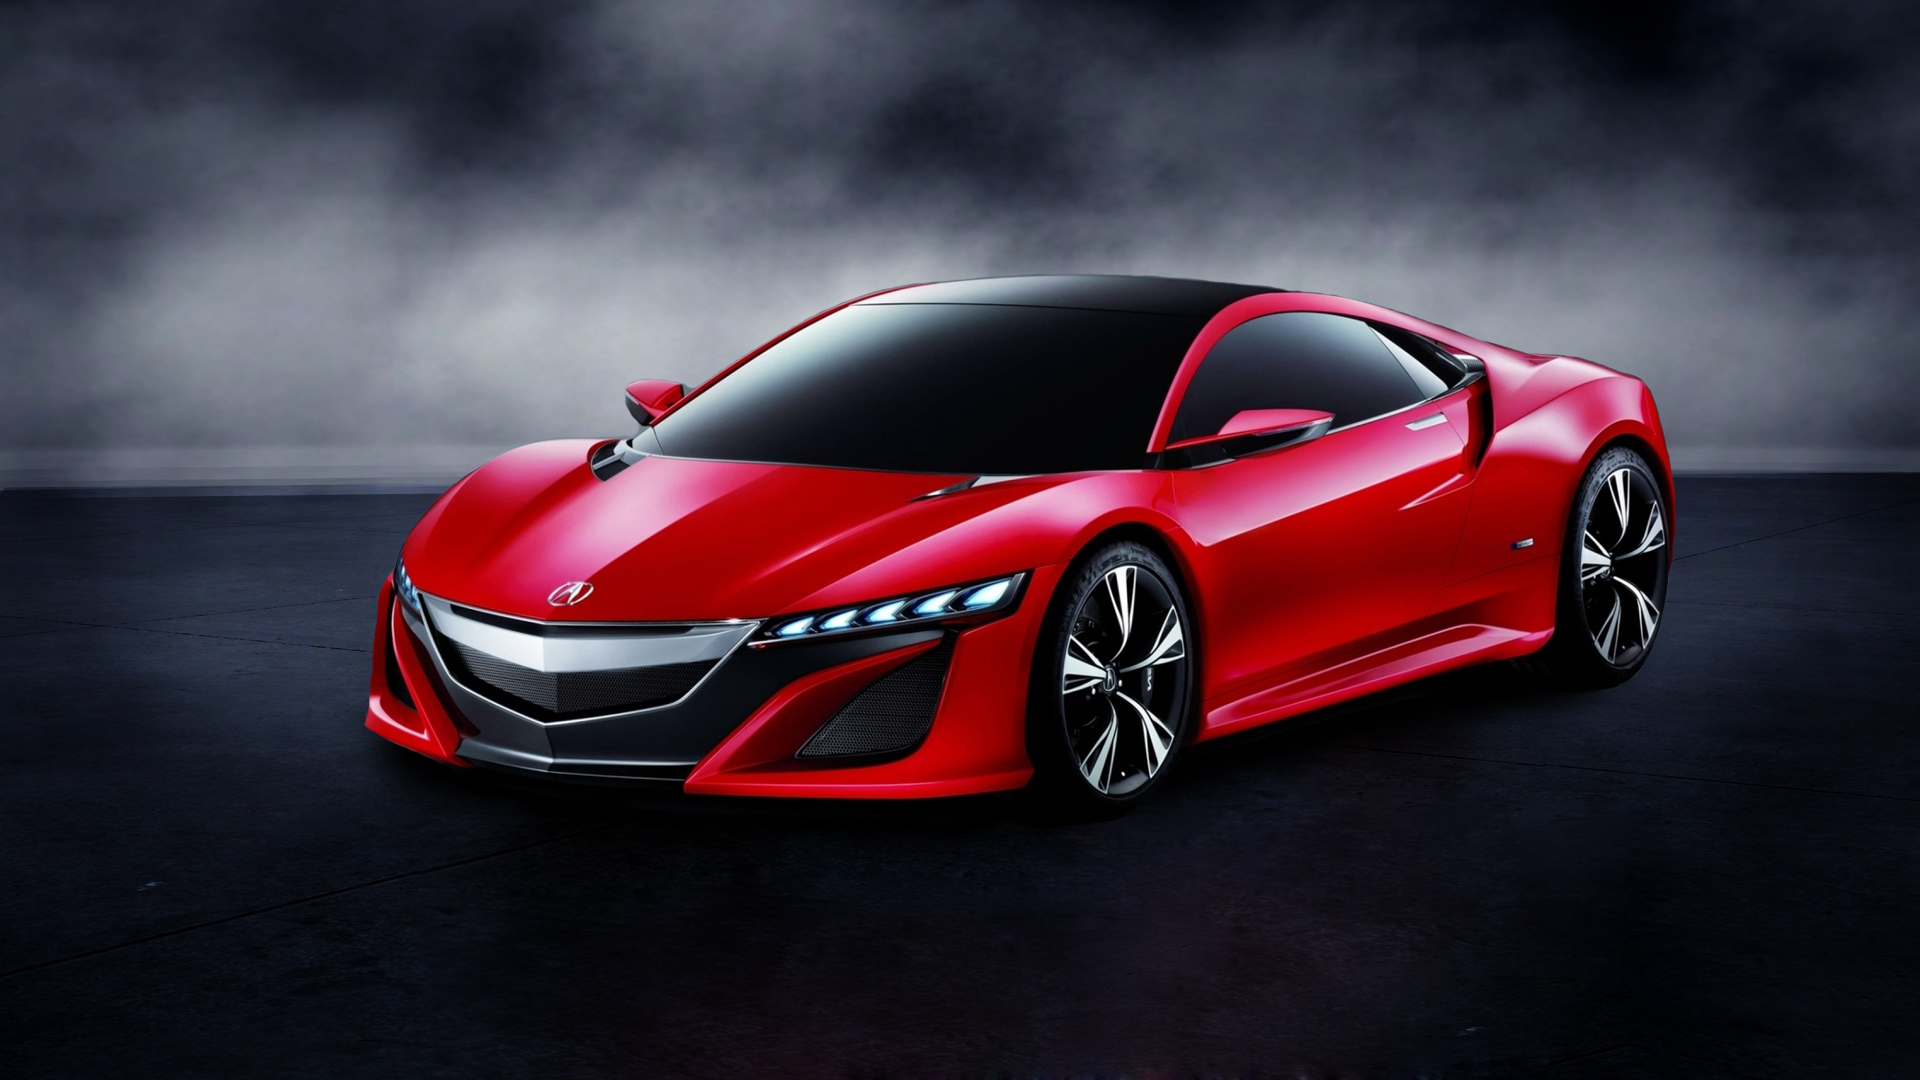 Free Download Acura Nsx Desktop Wallpapers Hd Hd Wallpapers 1920x1080 For Your Desktop Mobile Tablet Explore 45 Acura Nsx Wallpaper Hd Acura Logo Wallpaper Nsx Wallpaper High Resolution Honda Nsx Wallpaper